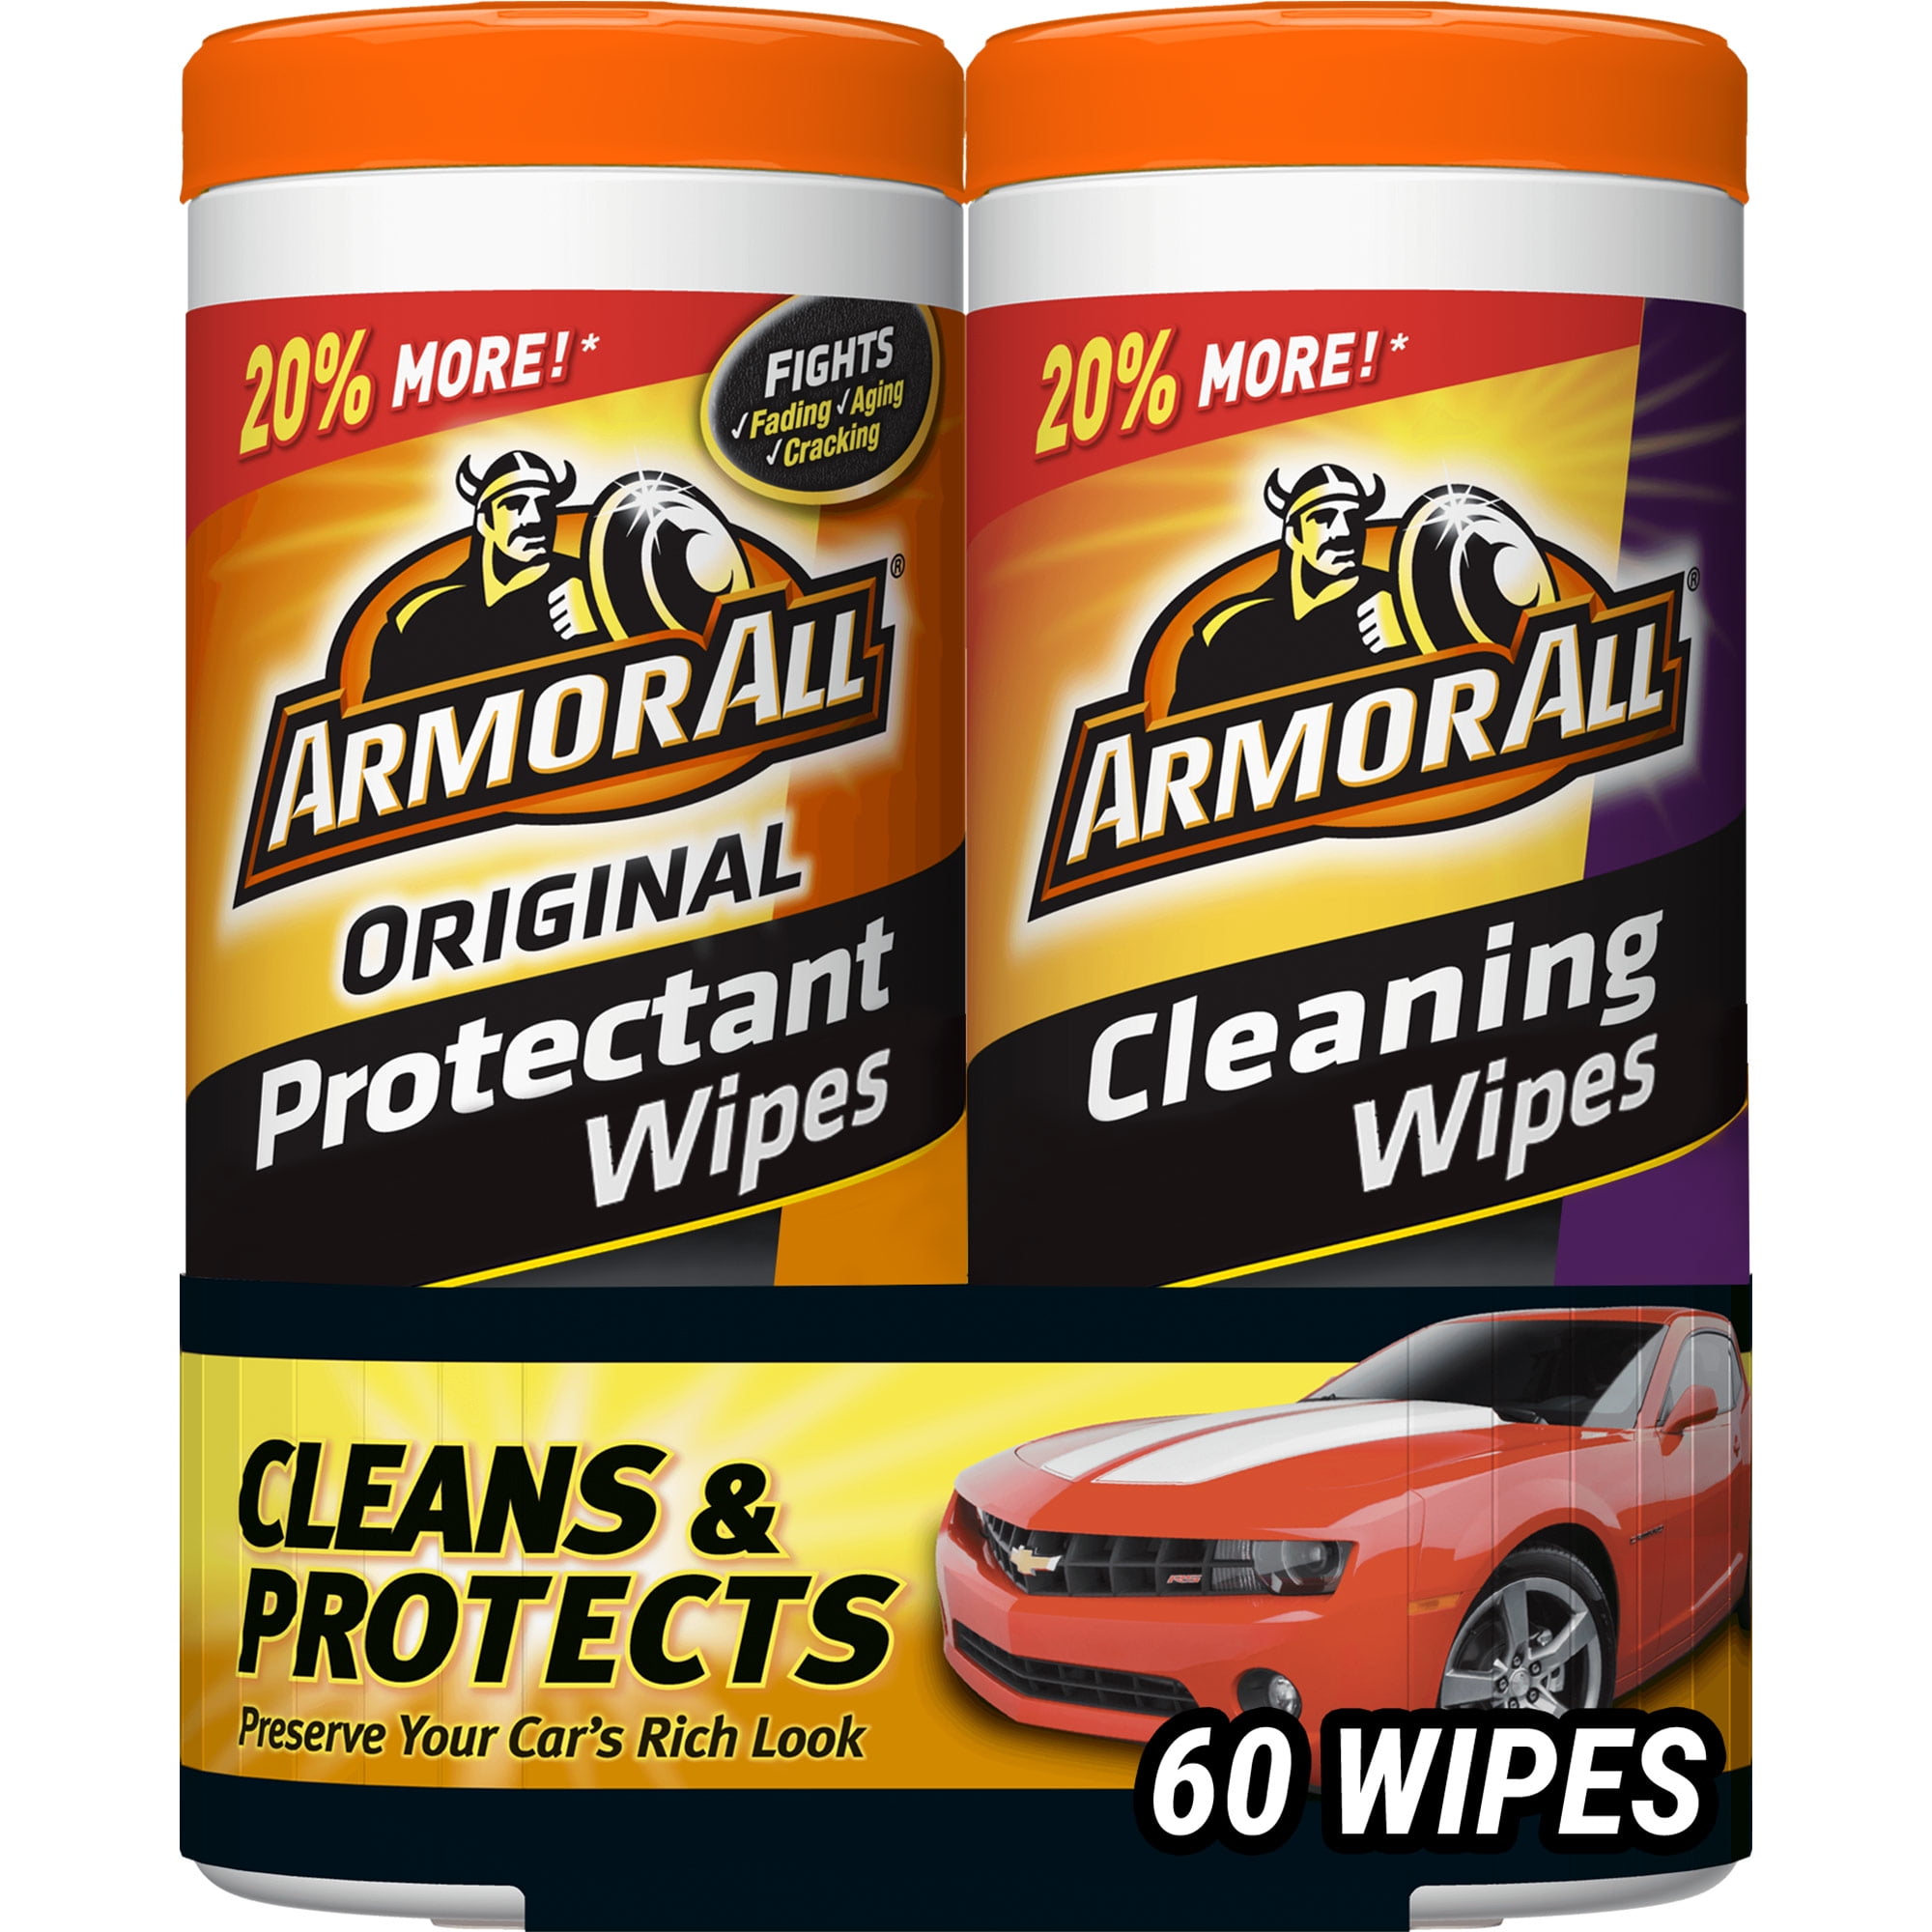 Armor All Original Car Protectant and Car Cleaning Wipes ( 2 - 30 Count Packs)